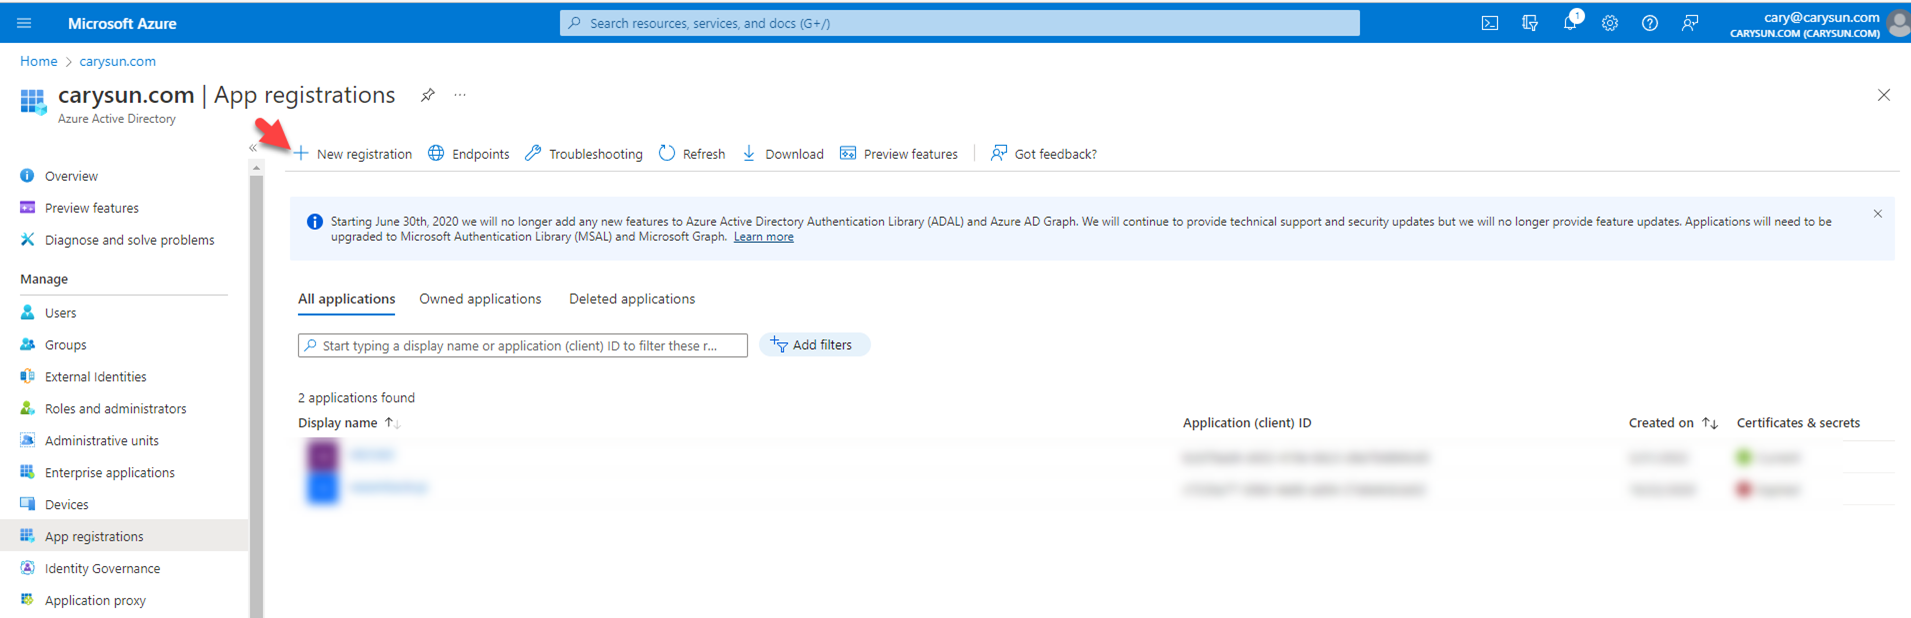 042222 1711 Howtoconfig4 - How to configure Azure AD Application Permissions for Modern Authentication and Legacy Protocols Authentication of Veeam Backup for Microsoft 365